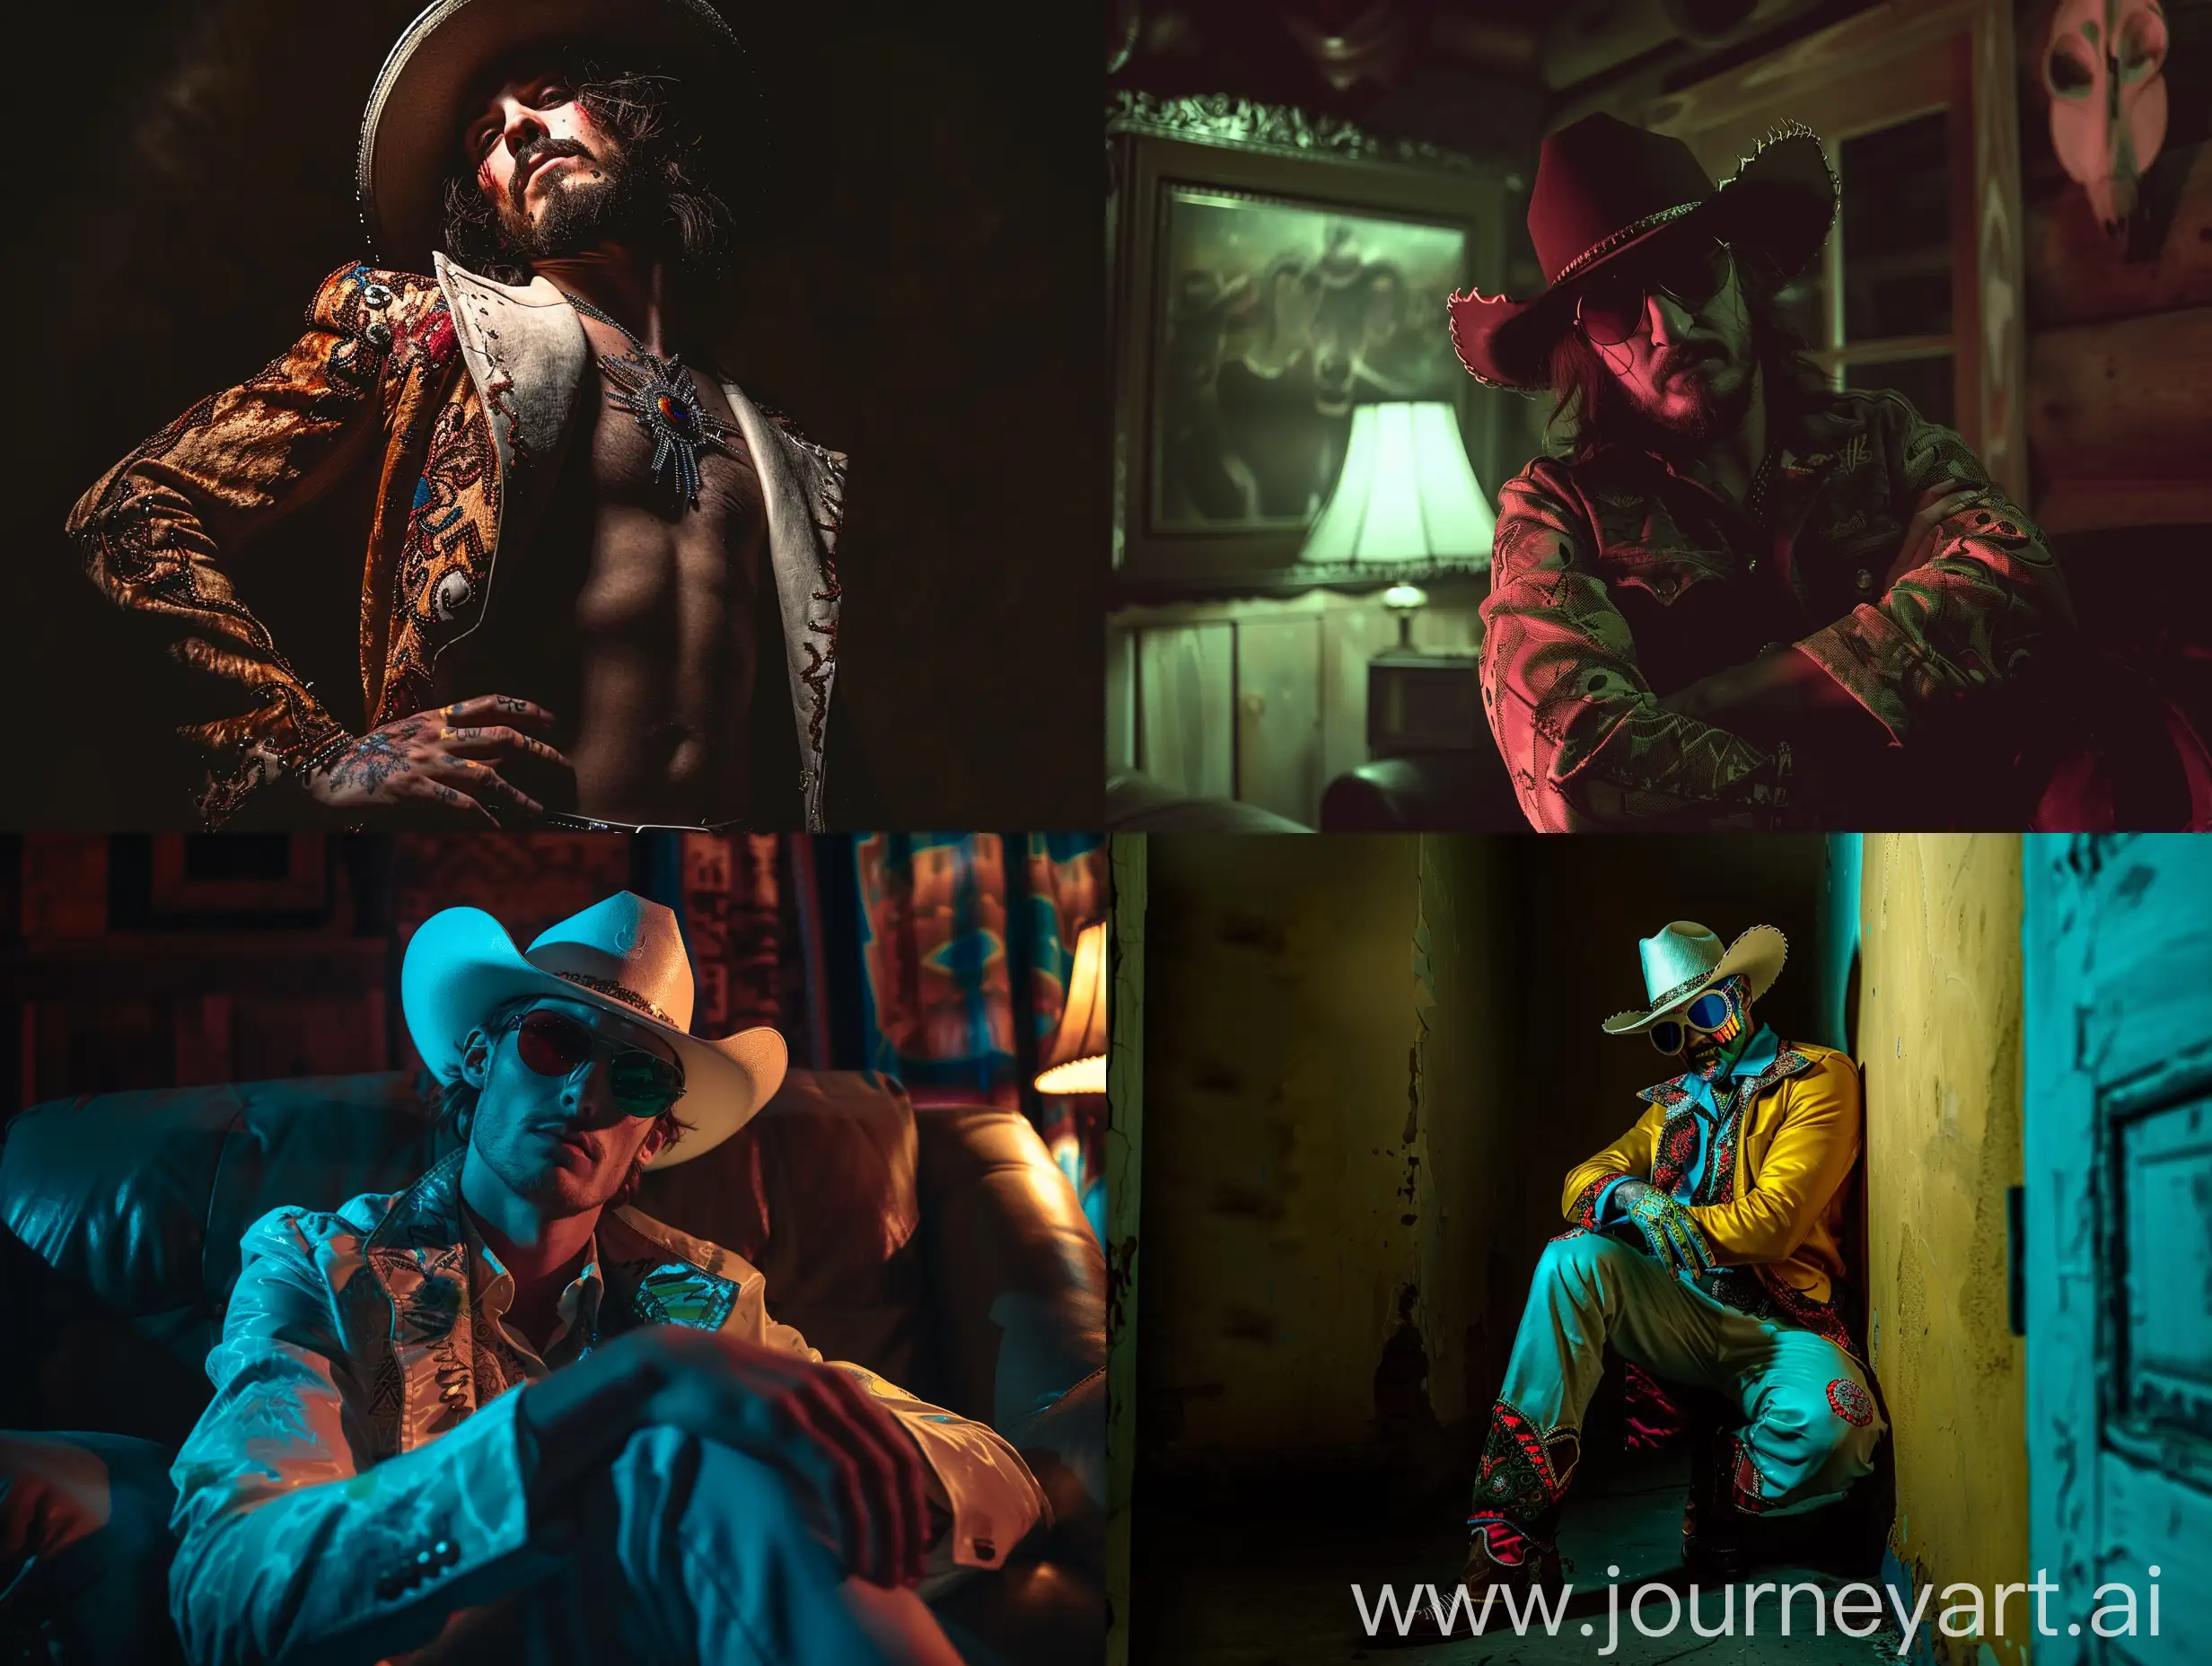 Psychedelic-Cowboy-Posing-in-Moody-Room-with-Cinematic-Lighting